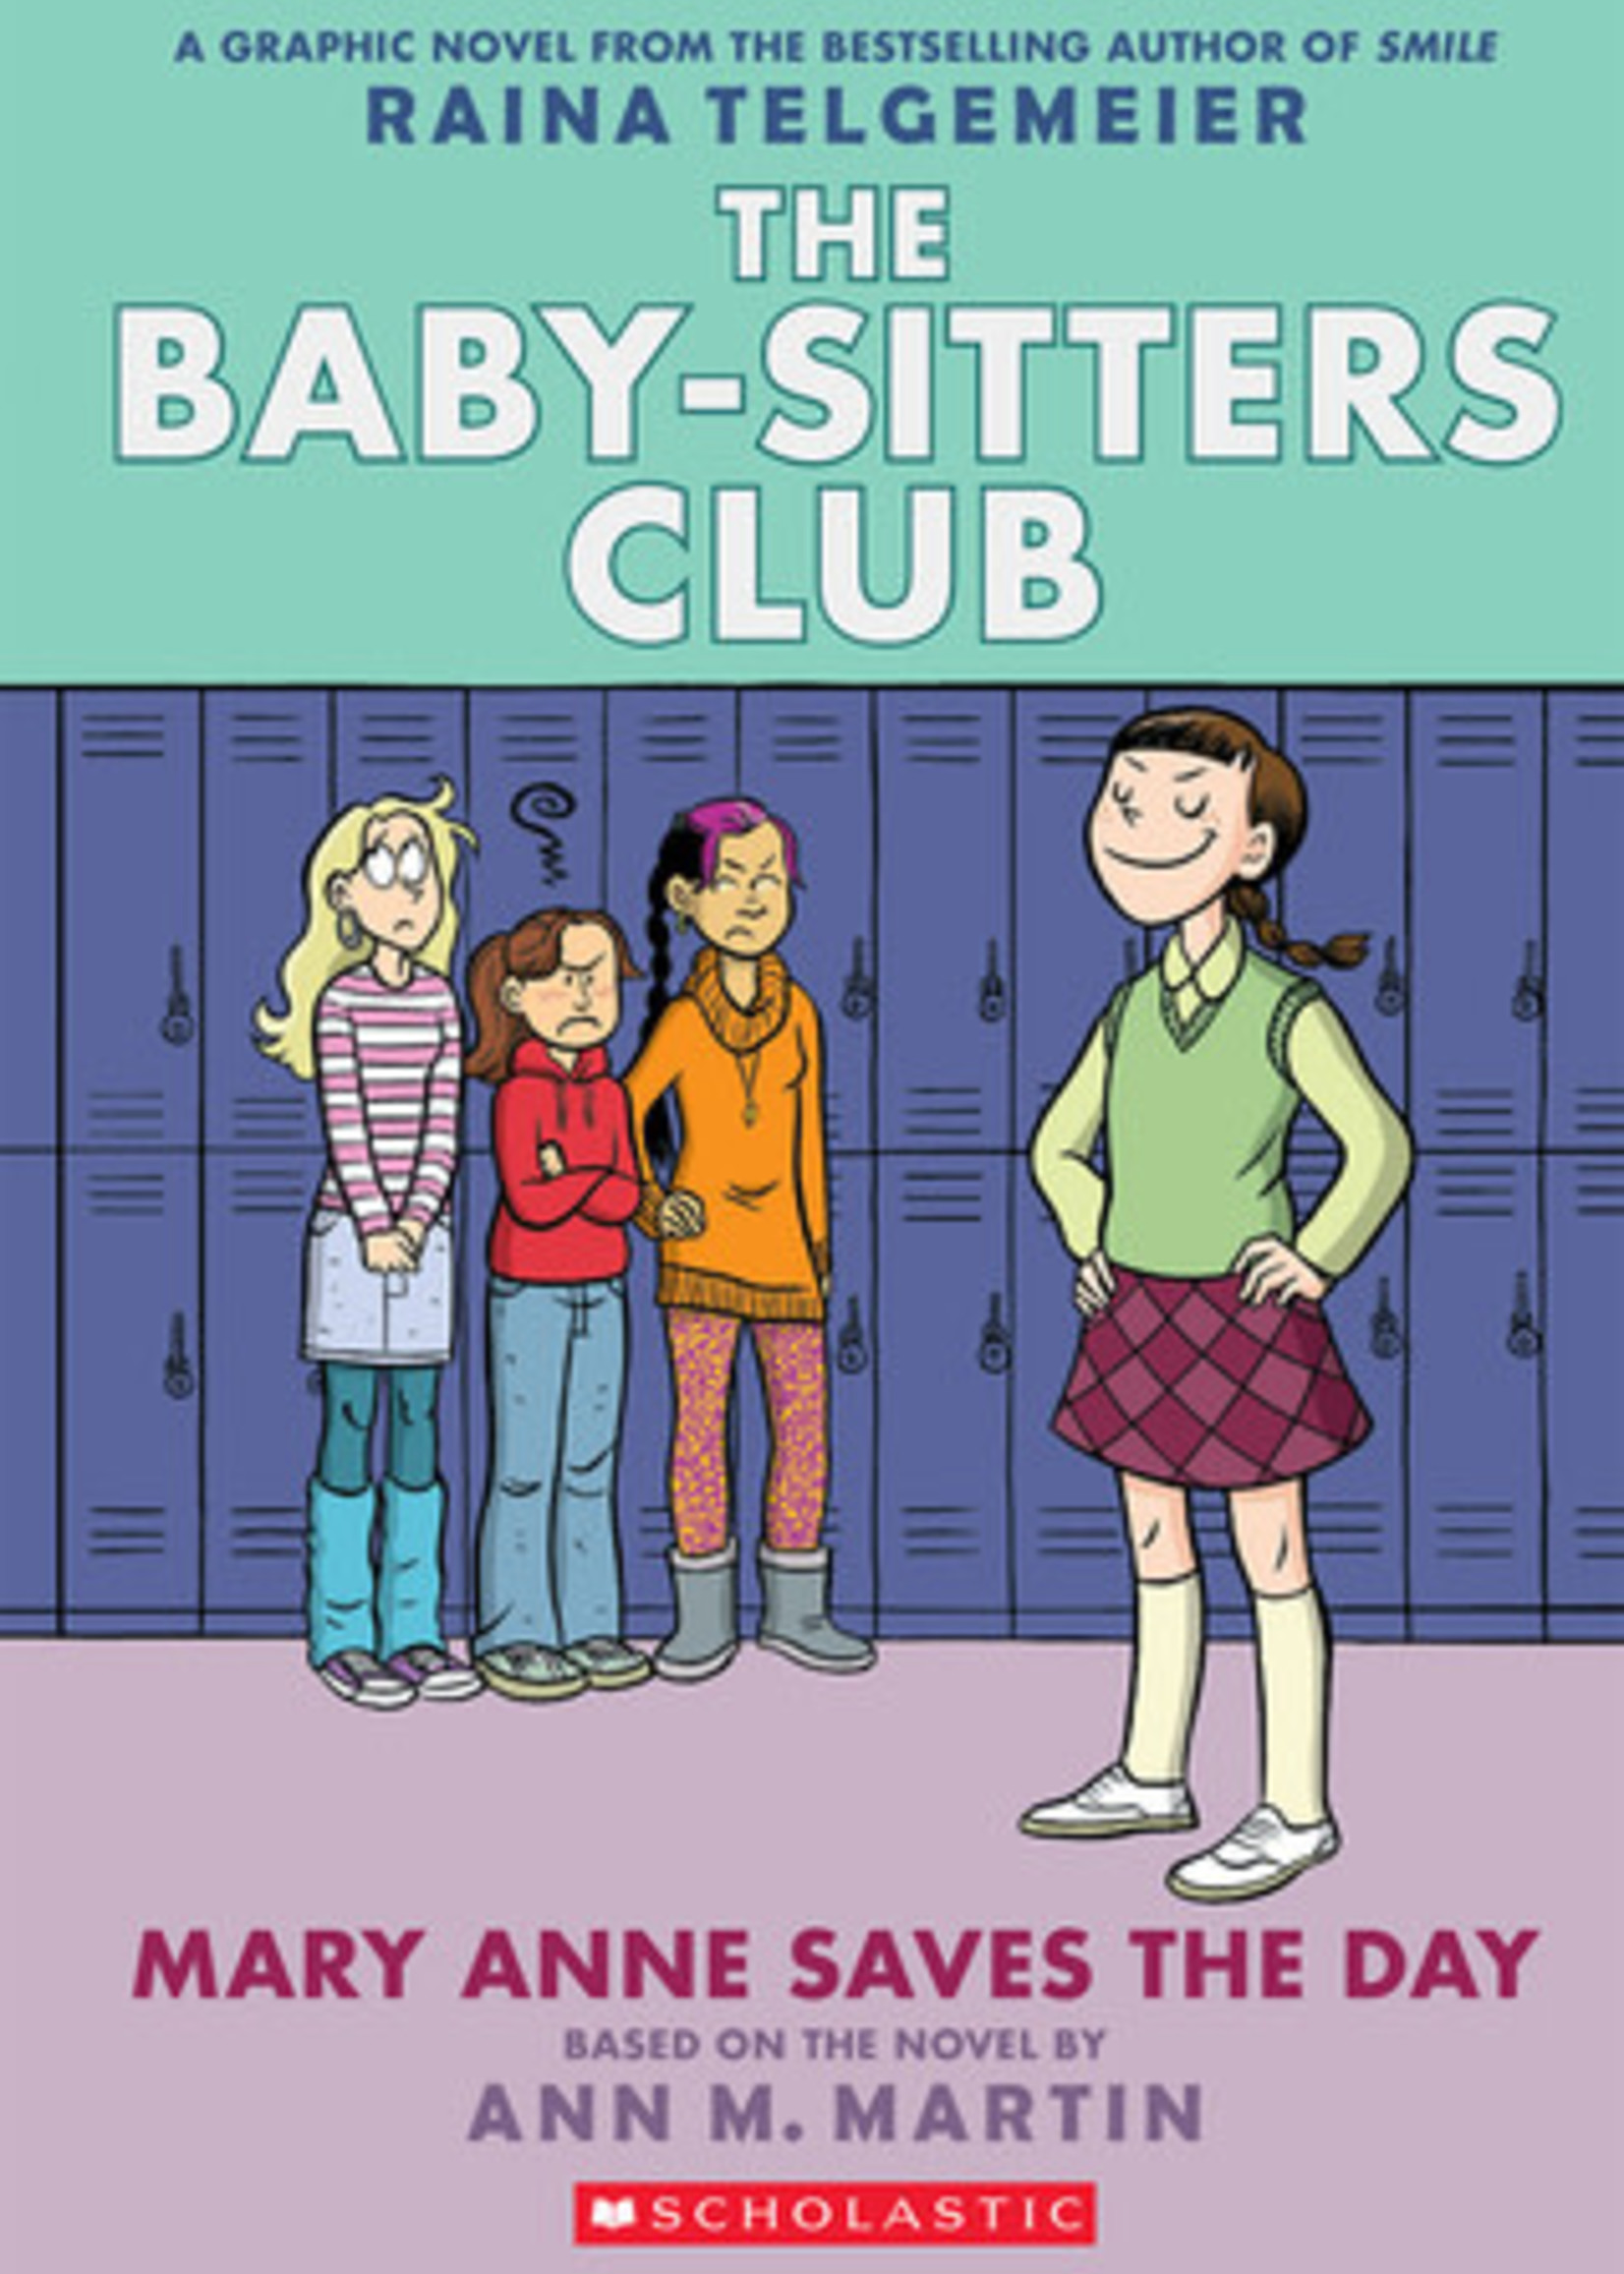 Mary Anne Saves the Day (Baby-Sitters Club Graphic Novels #3) by Raina Telgemeier